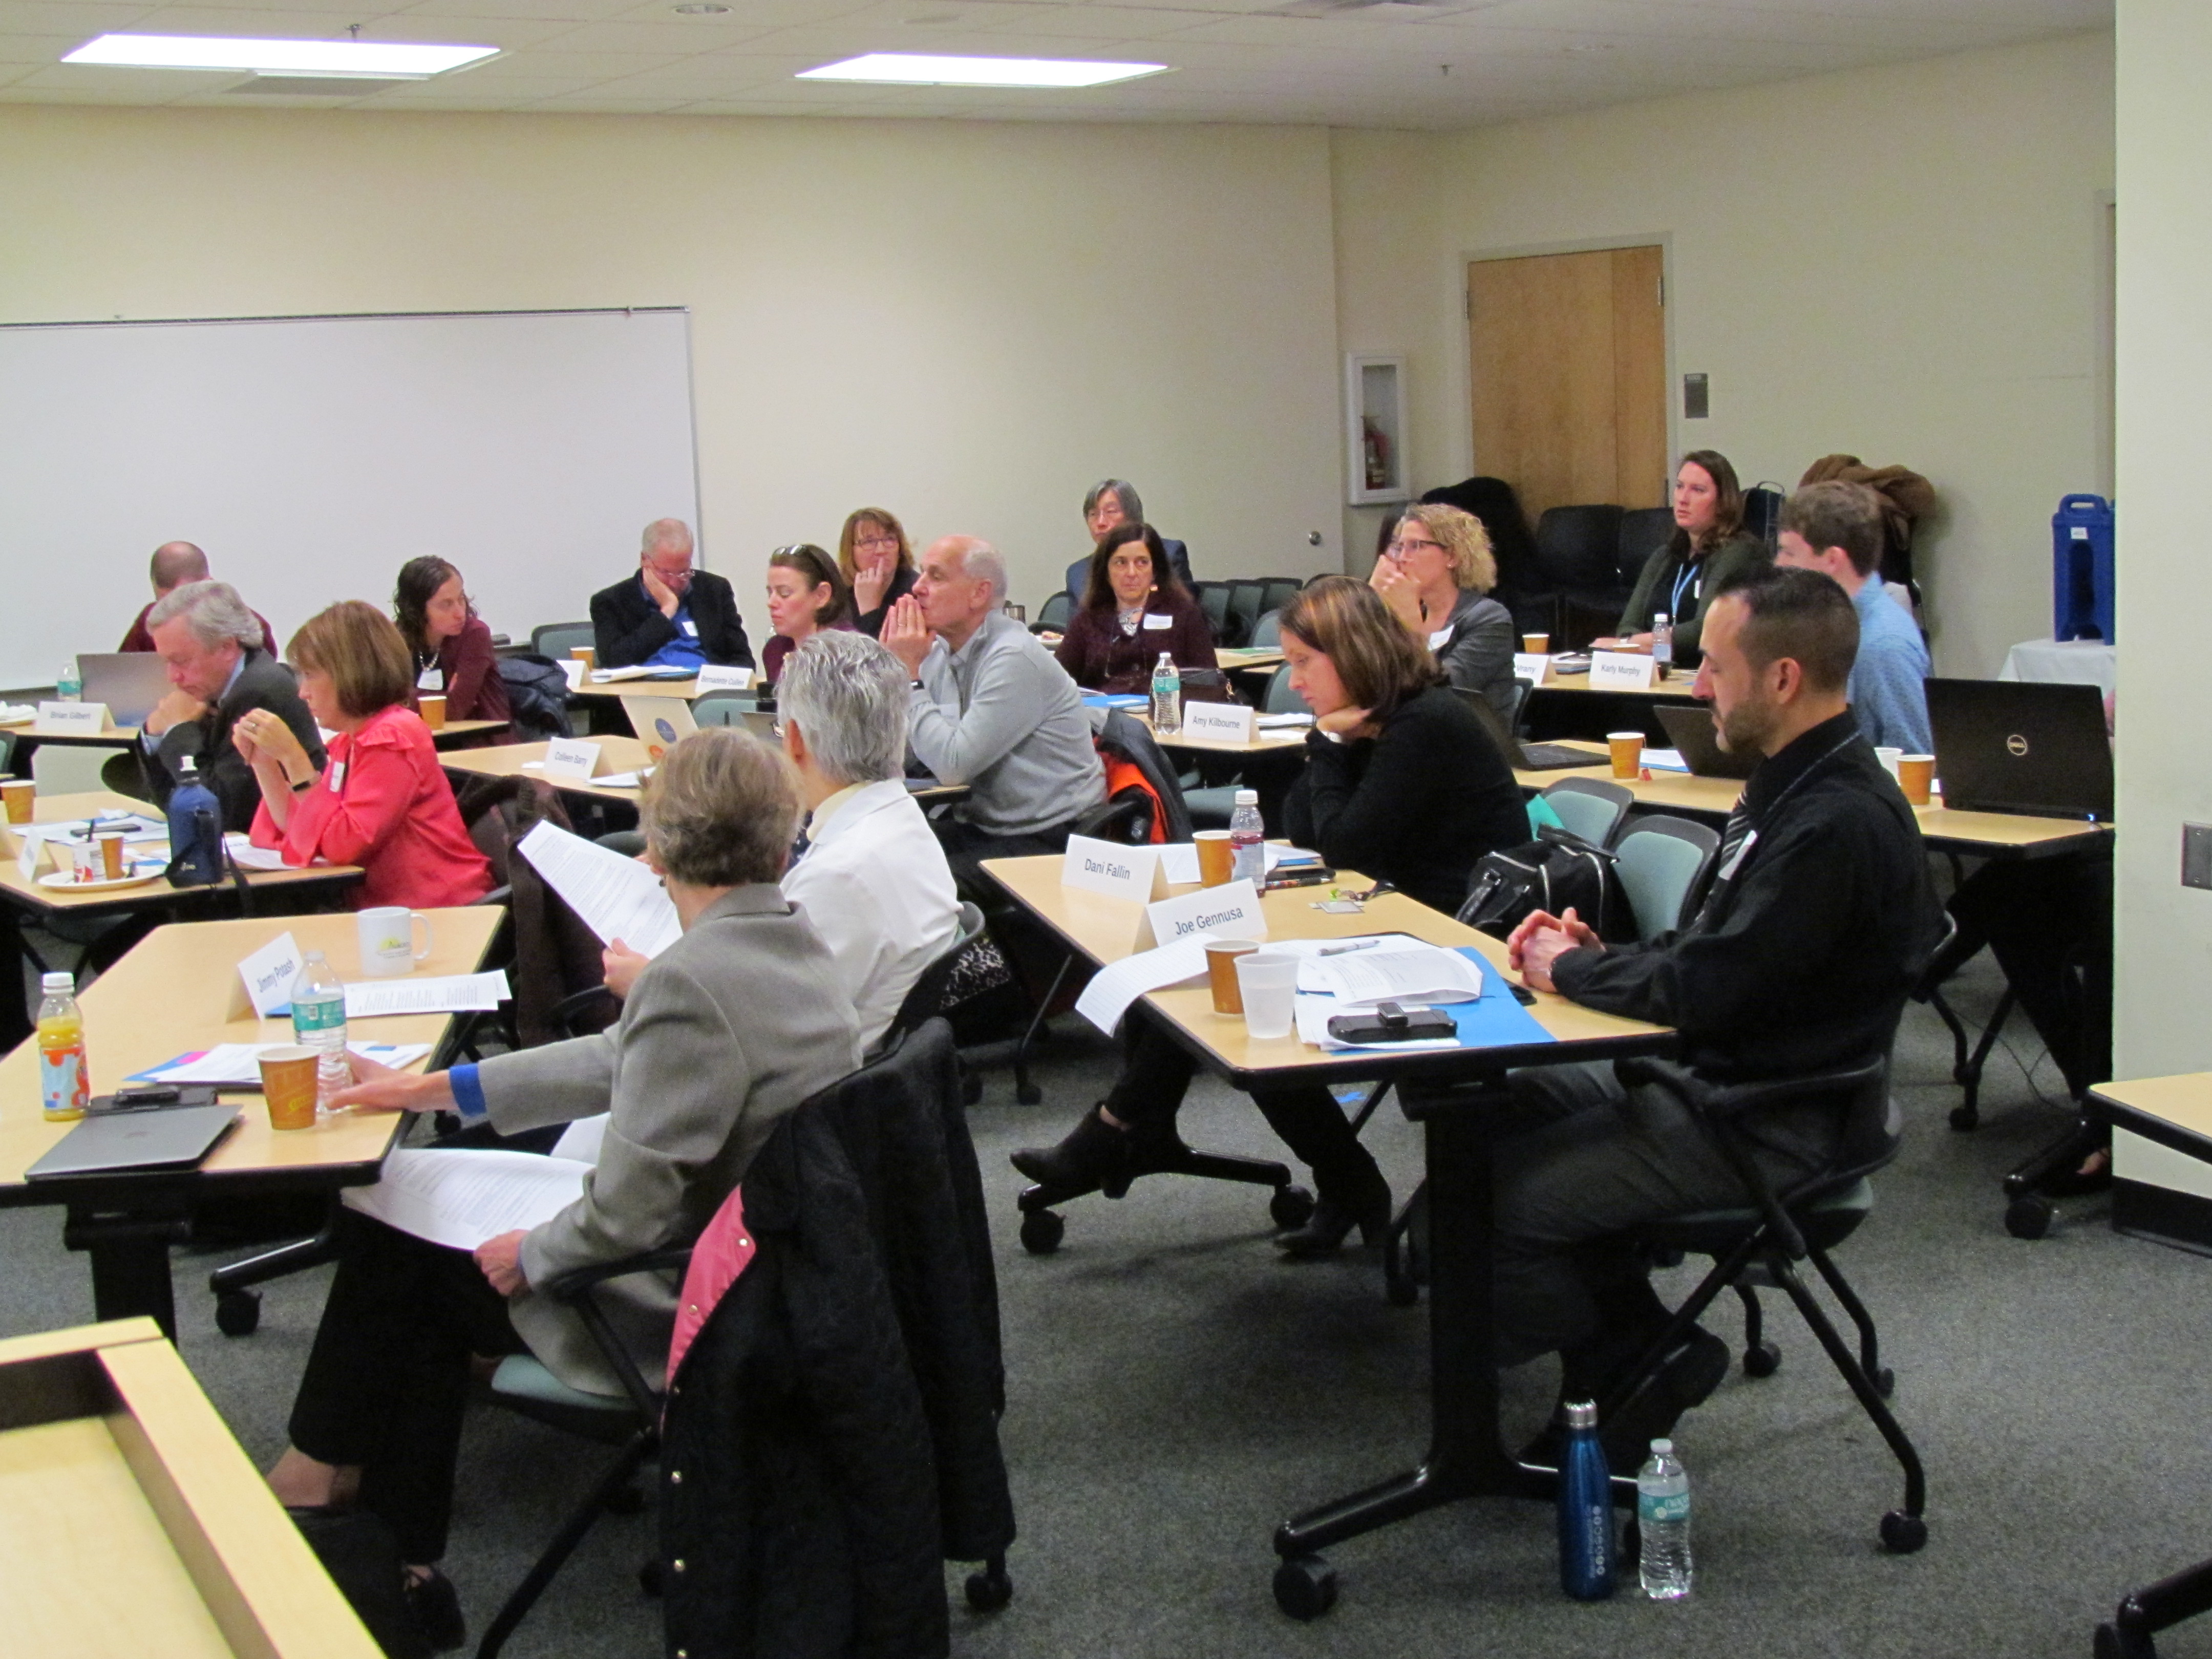 ALACRITY Center Faculty and External Advisory Board Members sitting at desks and engaged in discussion during an active meeting.